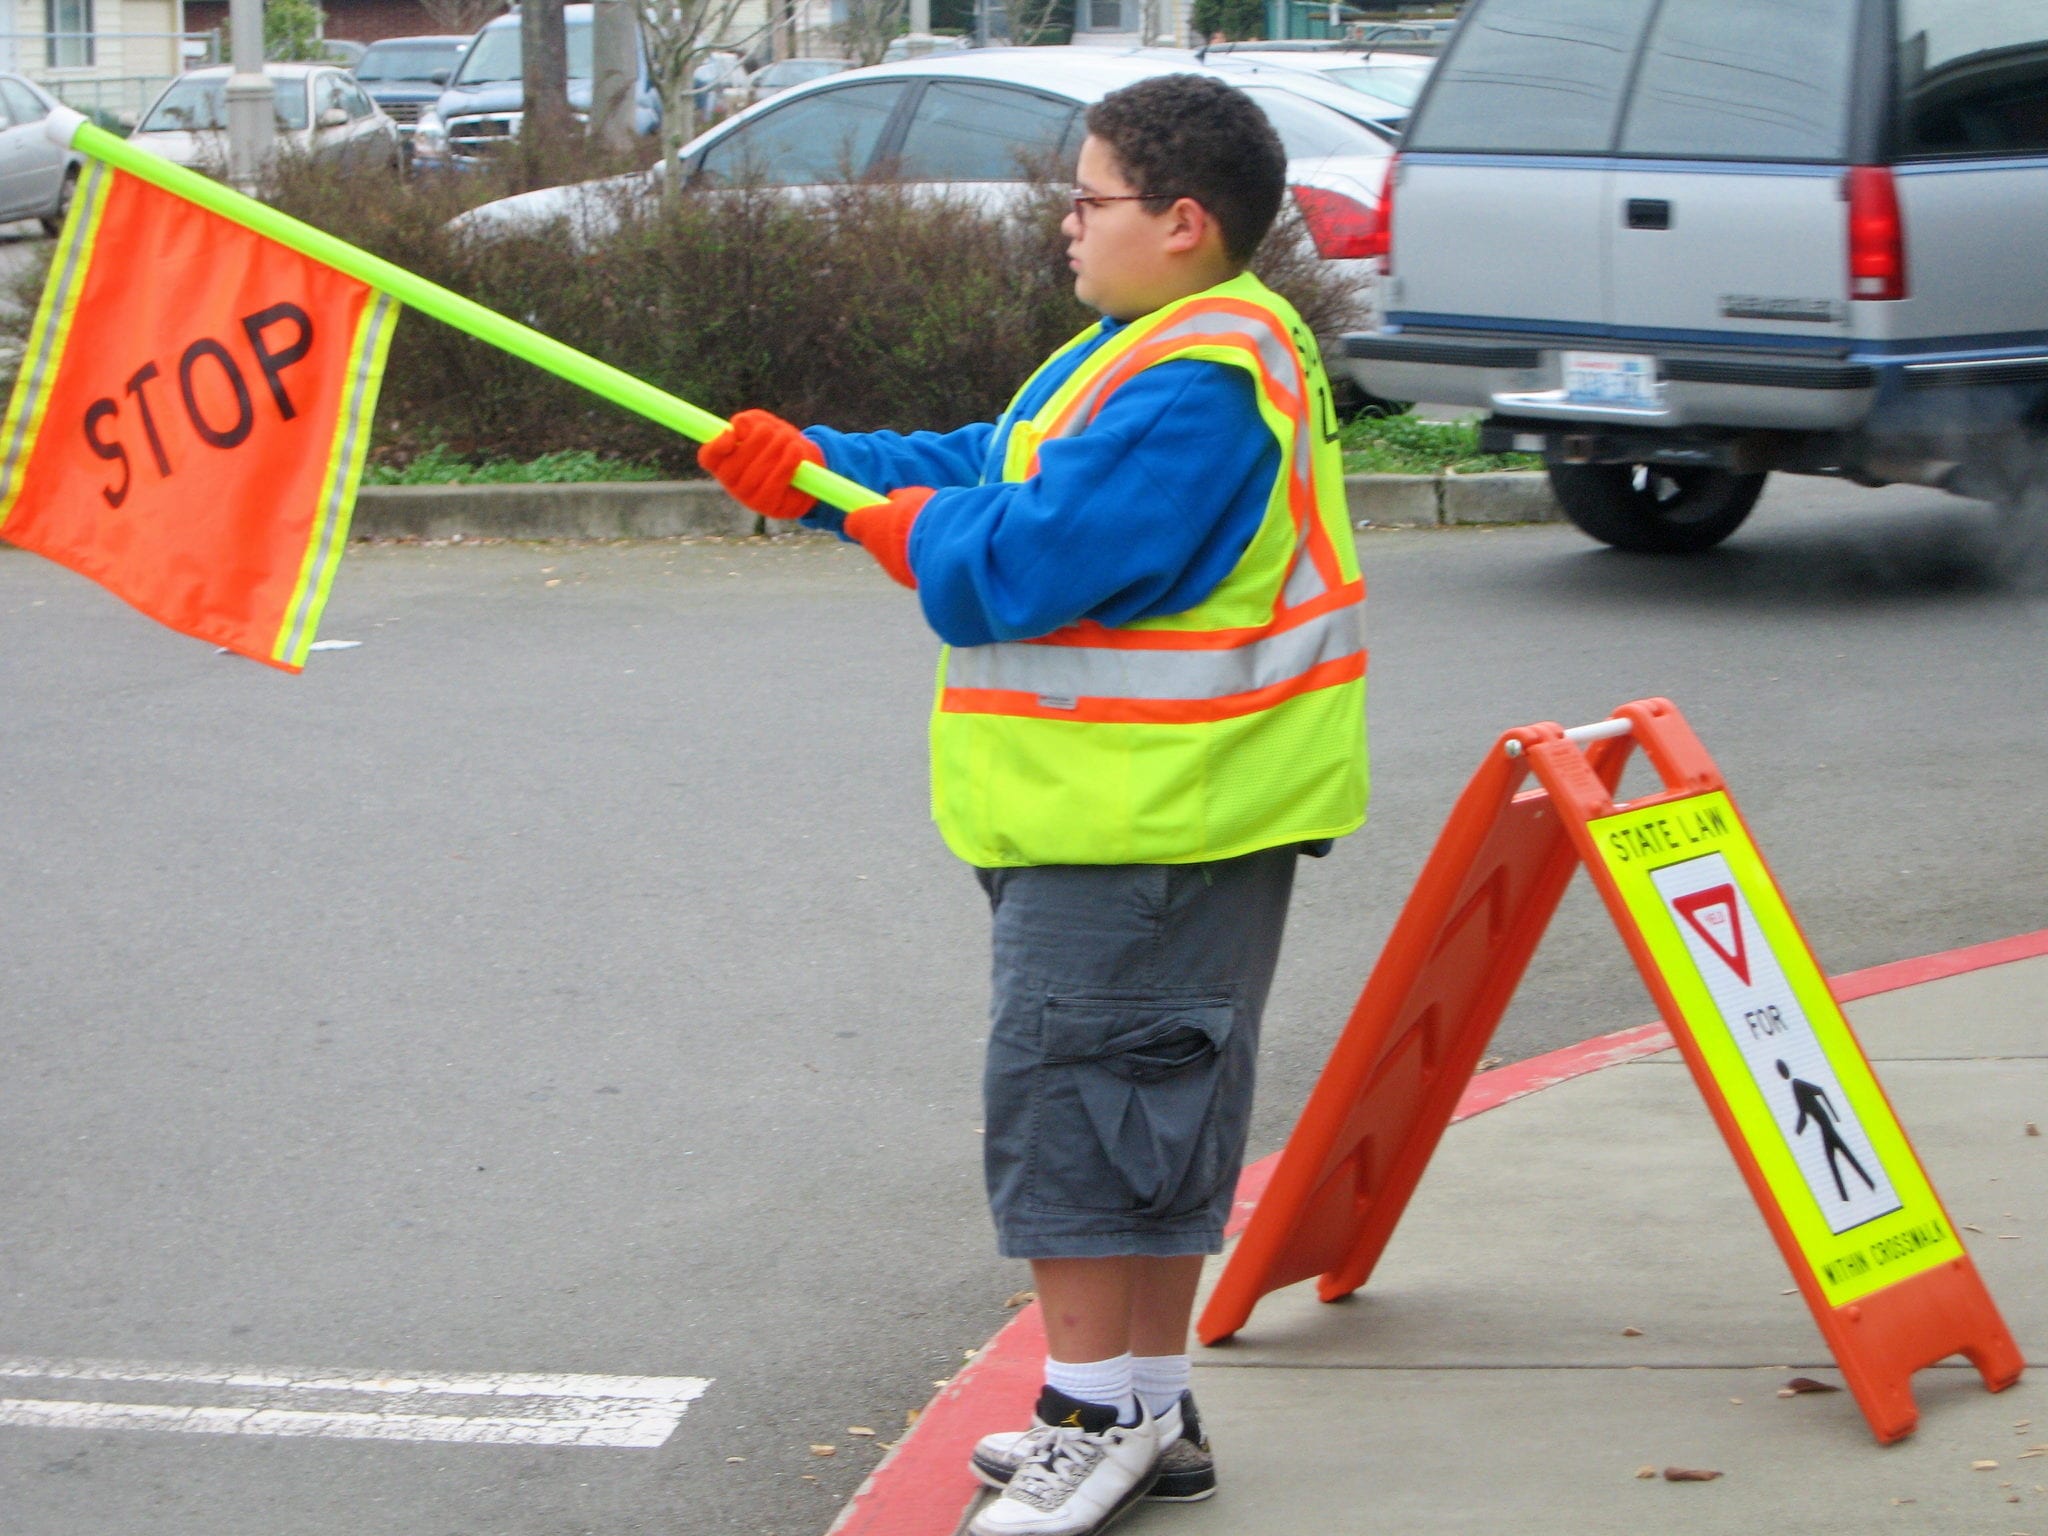 A person holding a stop flag in a school parking lot.